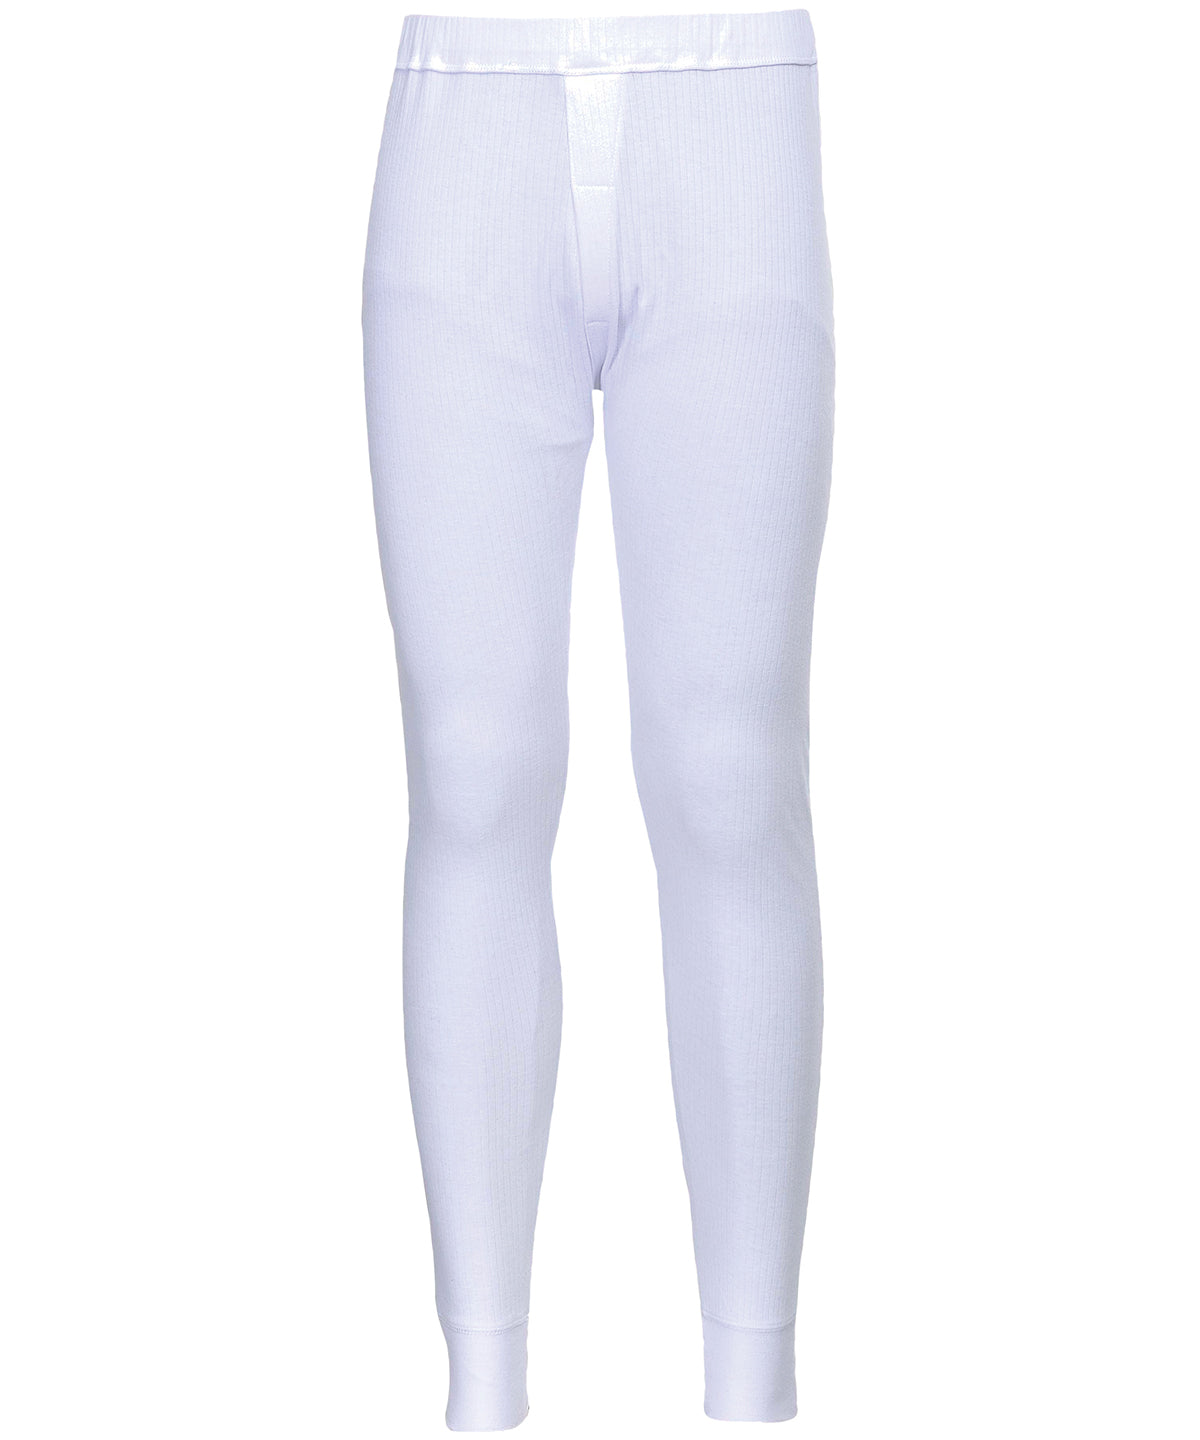 Thermal Trousers (B121)